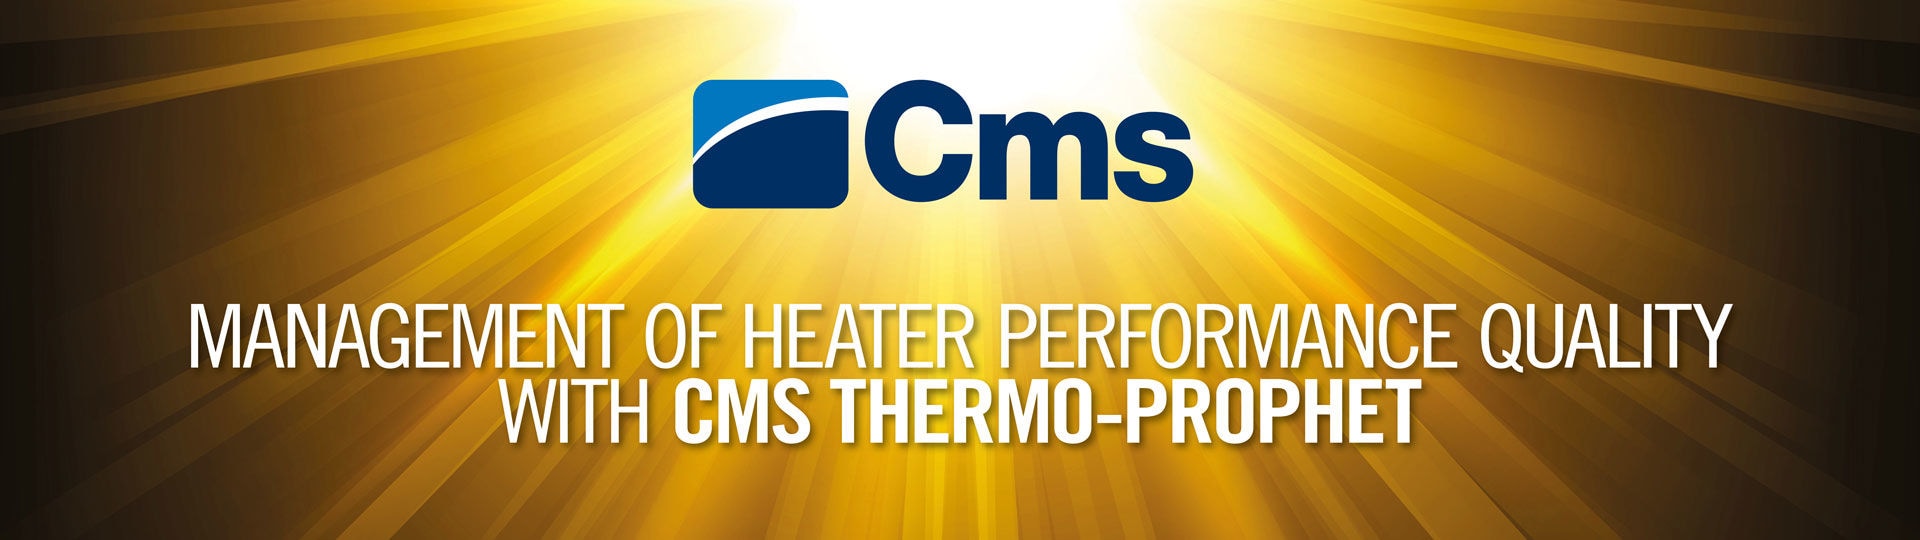 Management of heater performance quality with CMS Thermo-Prophet